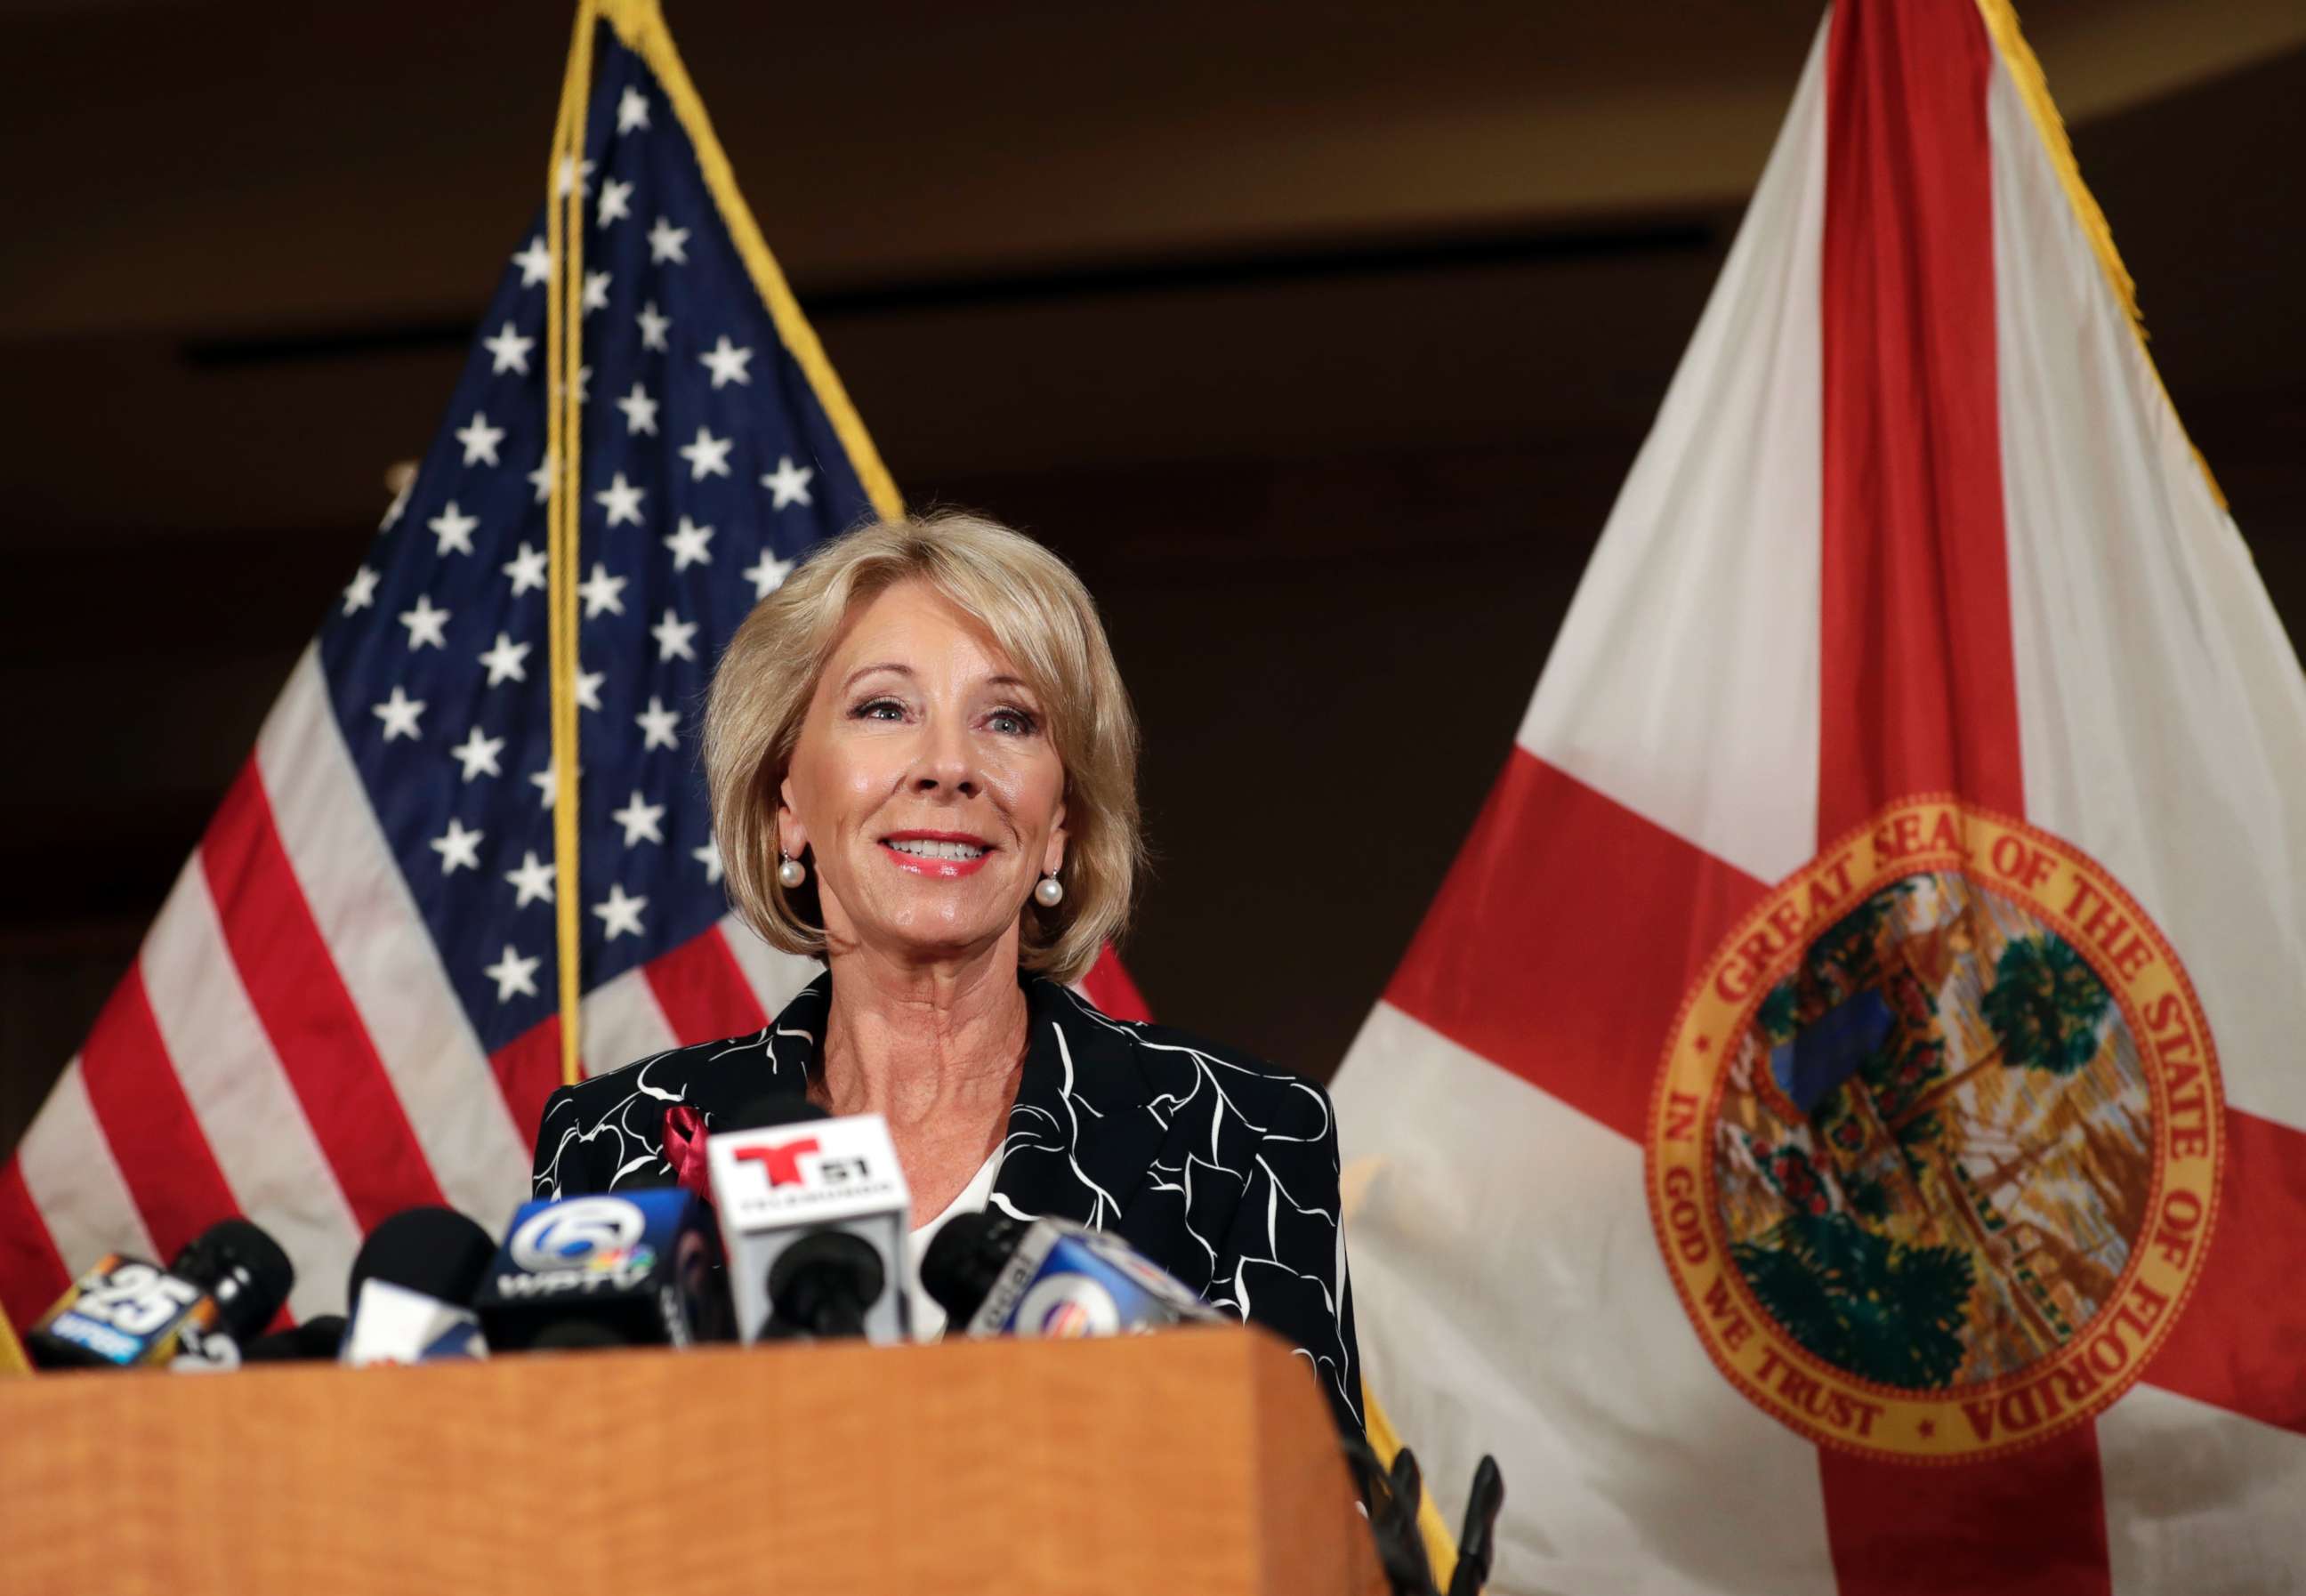 PHOTO: Secretary of Education Betsy DeVos speaks at a news conference following a visit to Marjory Stoneman Douglas High School, March 7, 2018, in Coral Springs, Fla.